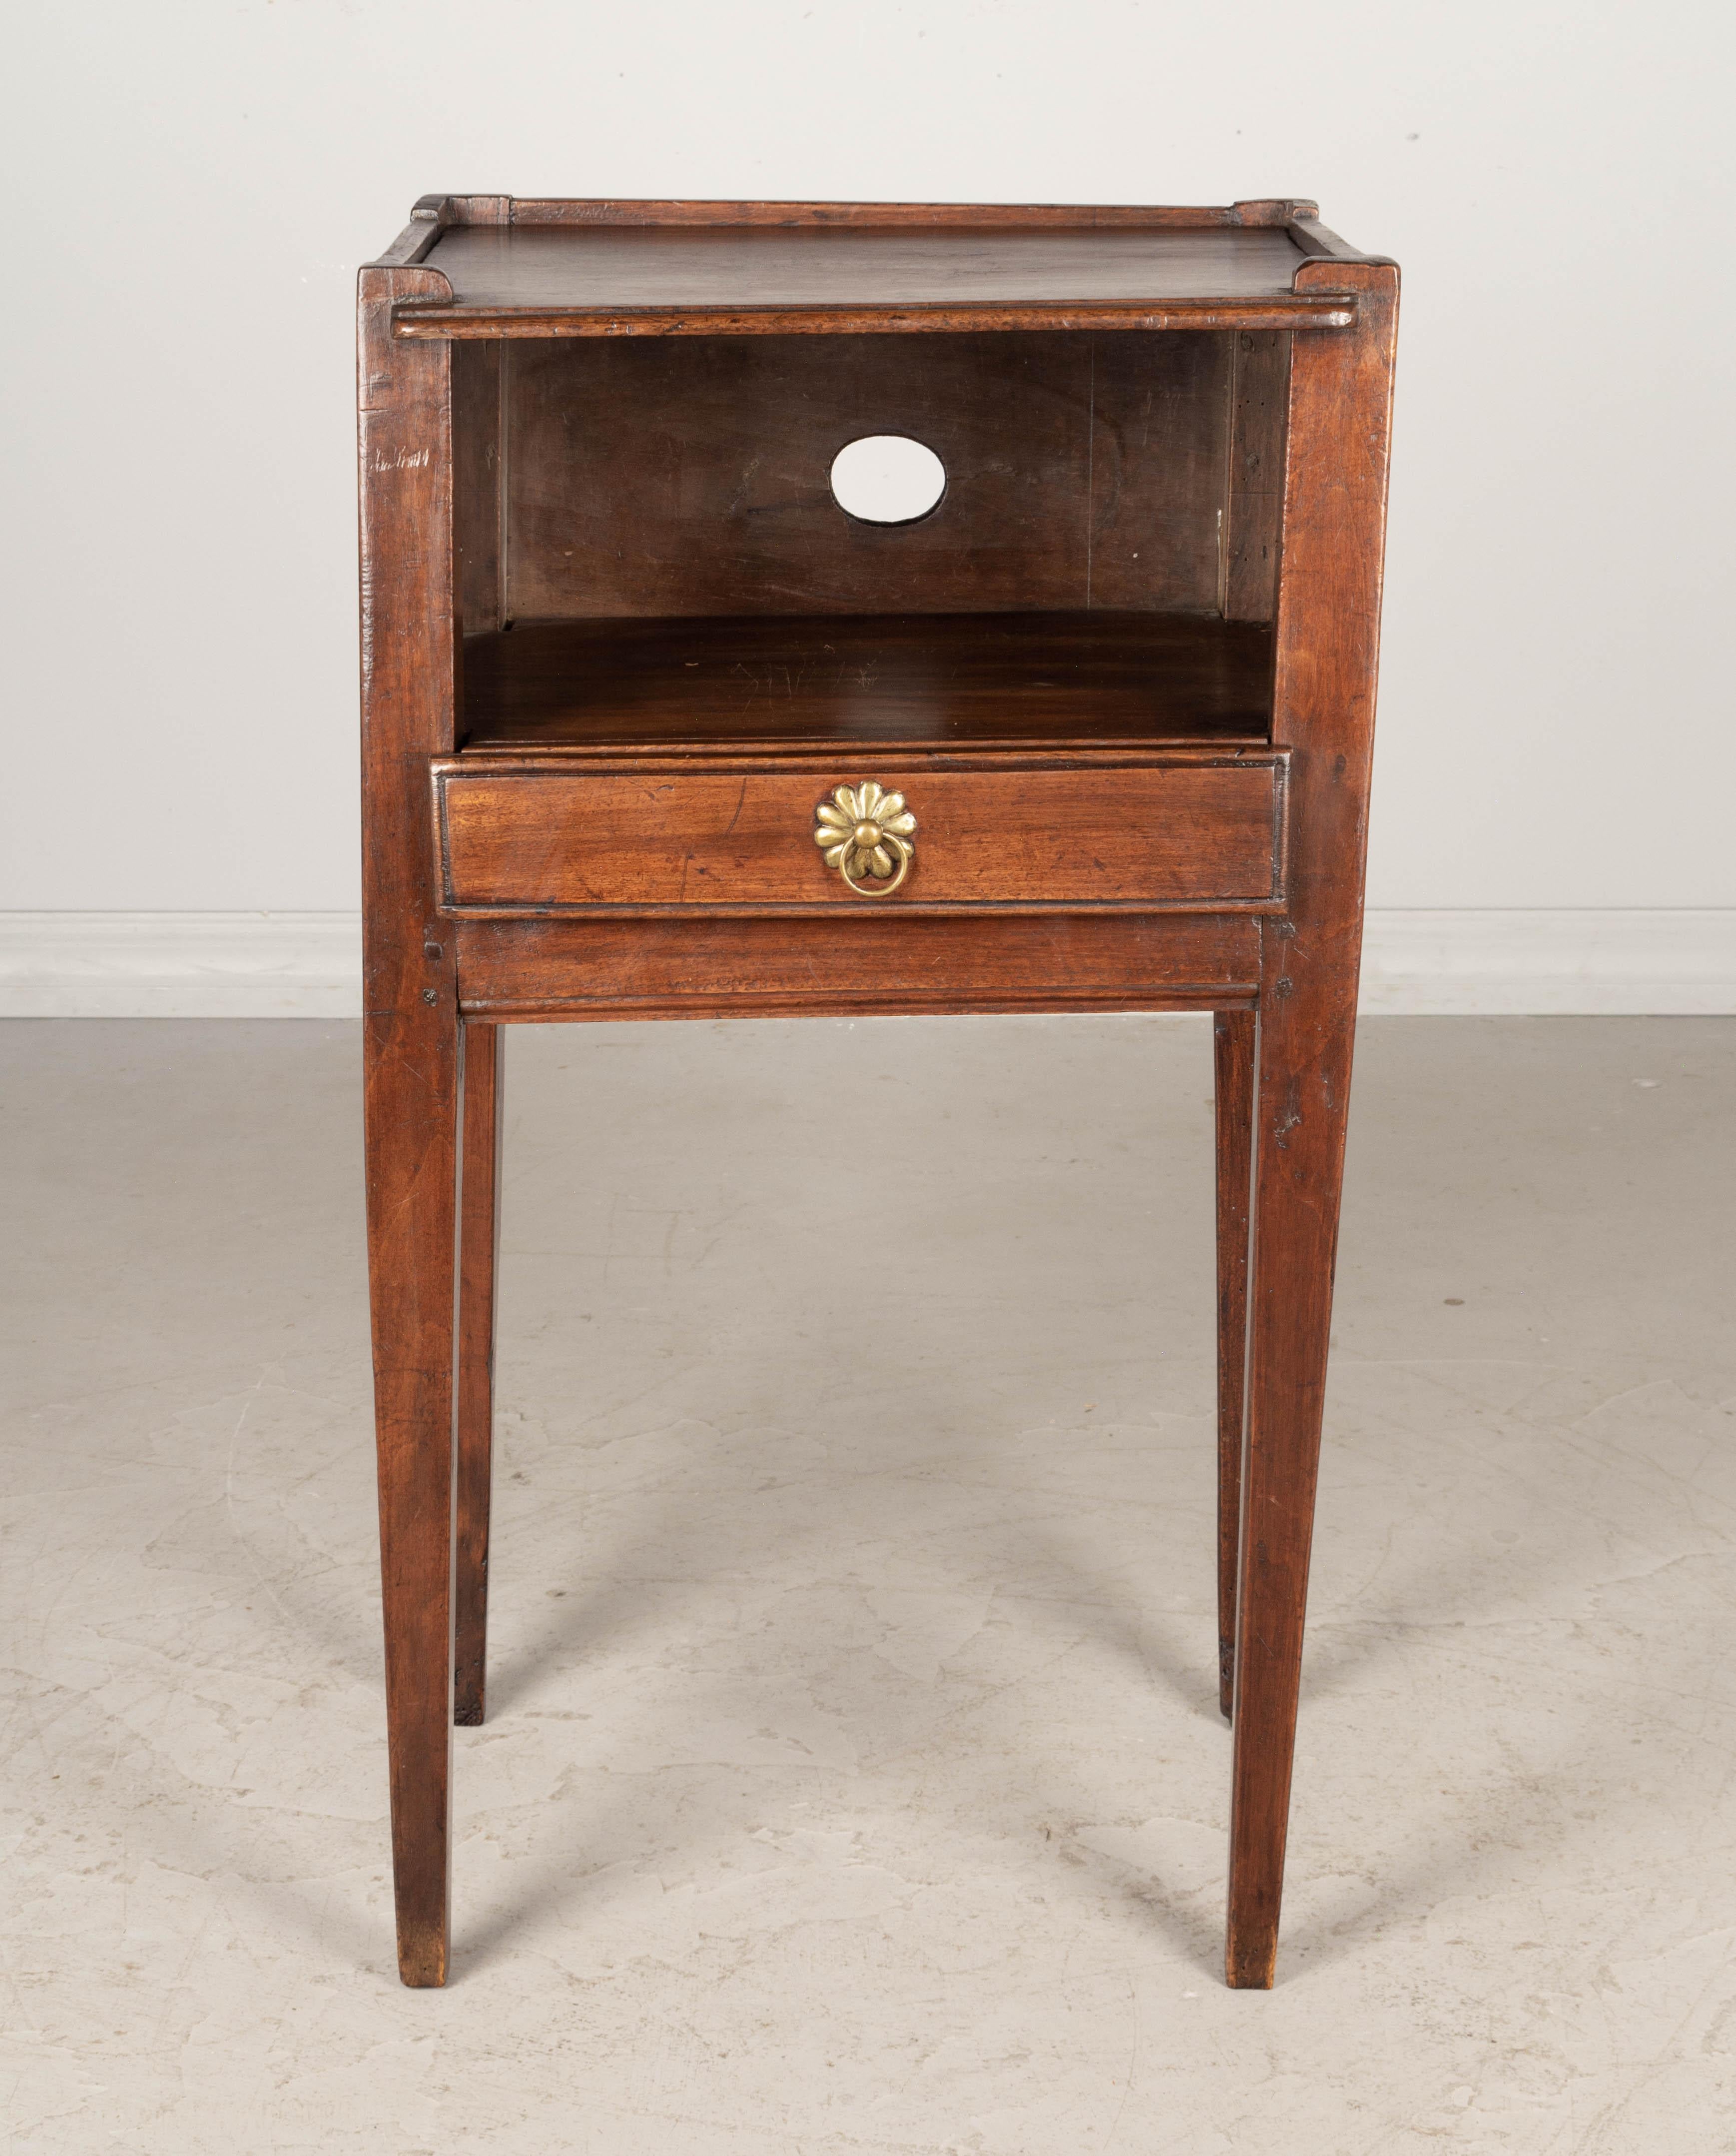 A 19th century Country French side table or nightstand made of solid walnut, with open niche and pierced quatrefoil shaped cut-outs on the sides. Drawer with brass ring pull. Slender tapered legs. Waxed patina.